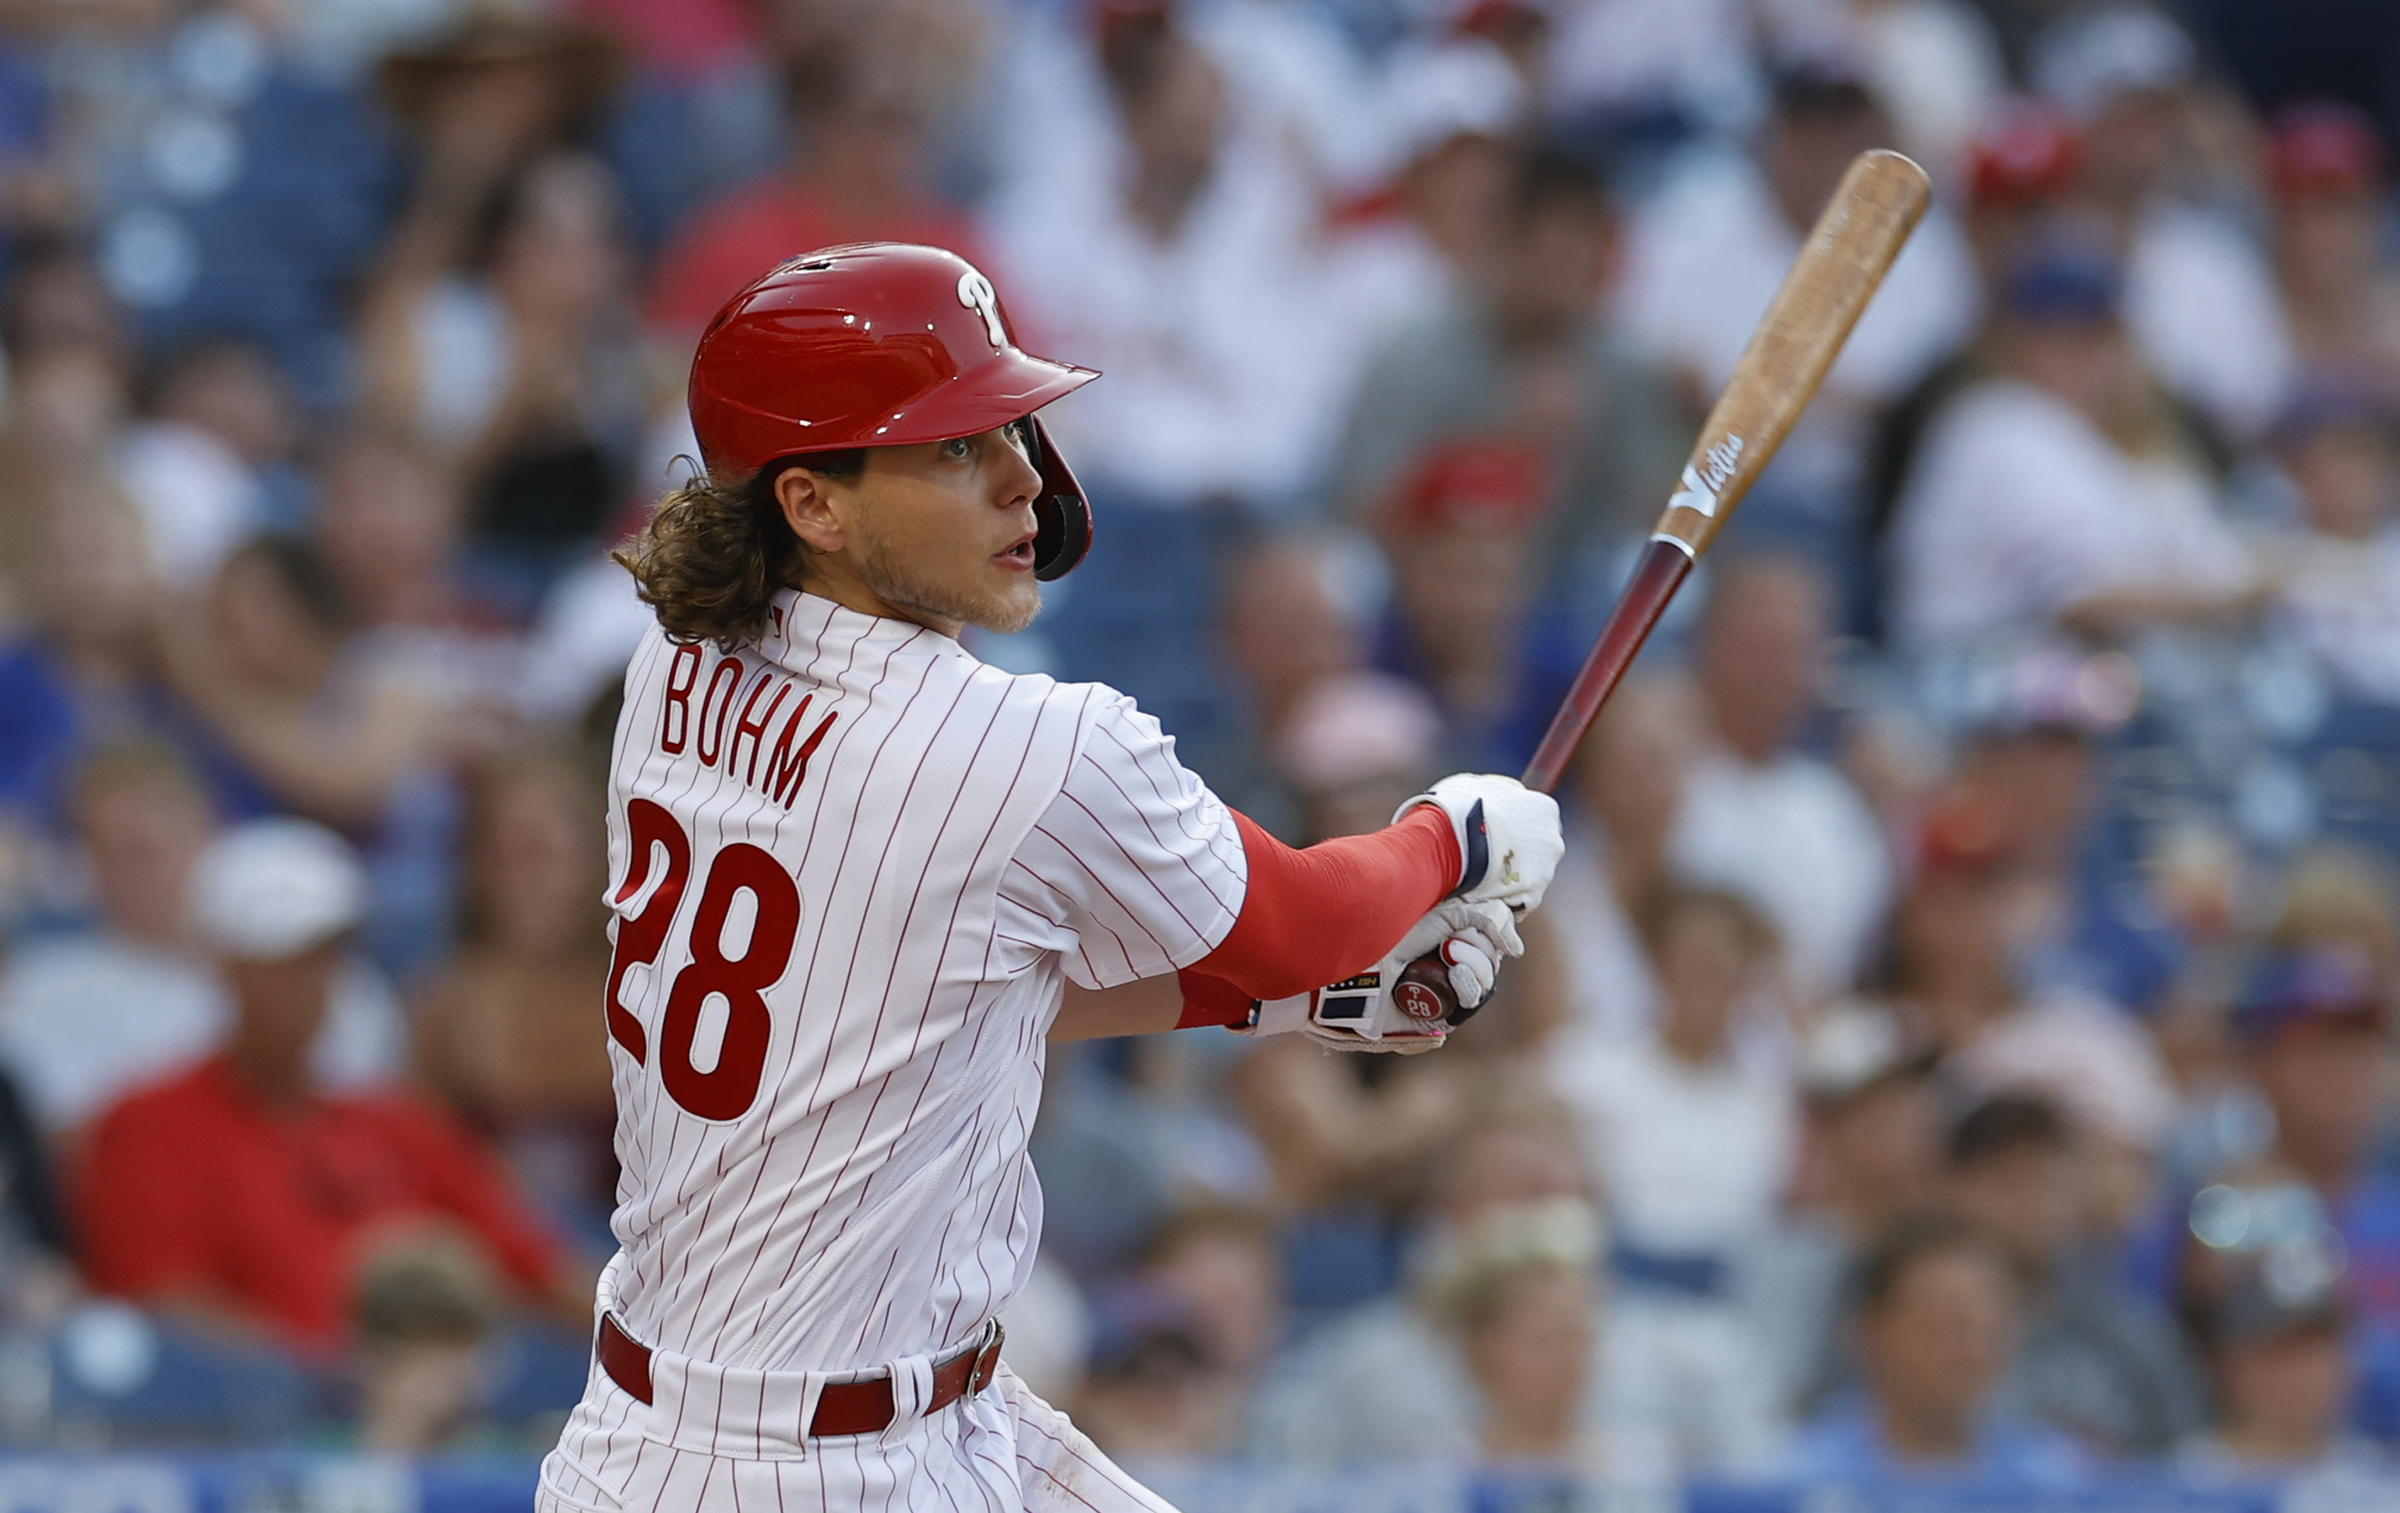 Alec Bohm finishes scalding month of July by helping the Phillies